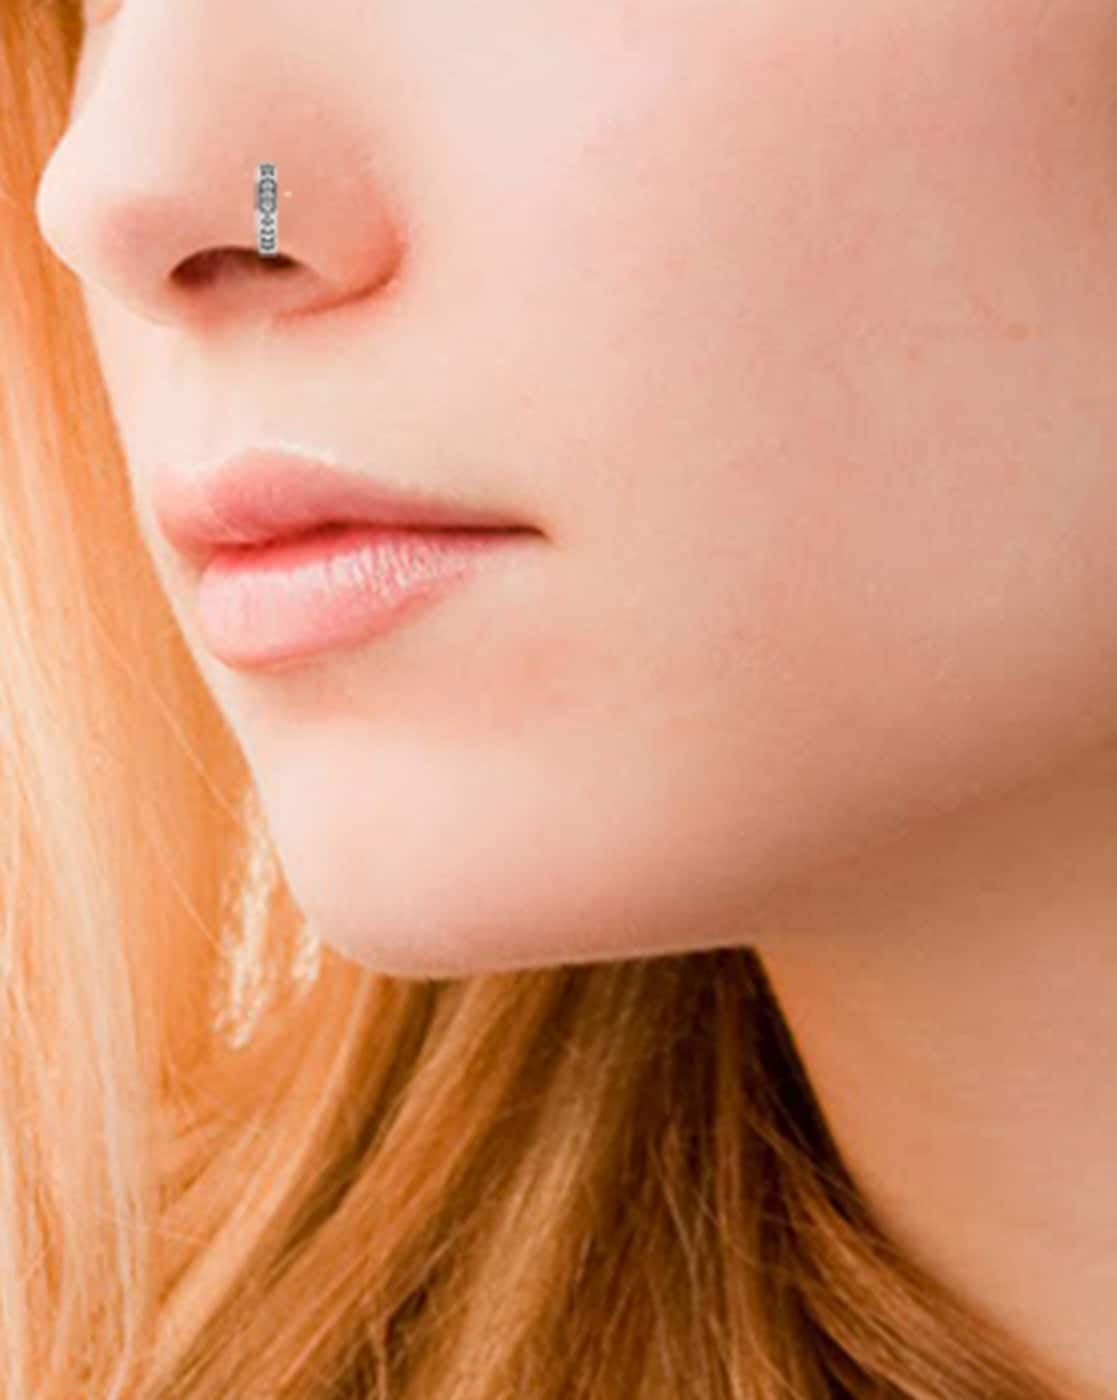 Amazon.com: Unique Nose Ring, 925 Sterling Silver Nose Hoop Piercing,  Indian Tribal Style, 20g Nose Ring, Handmade Body Jewelry : Handmade  Products